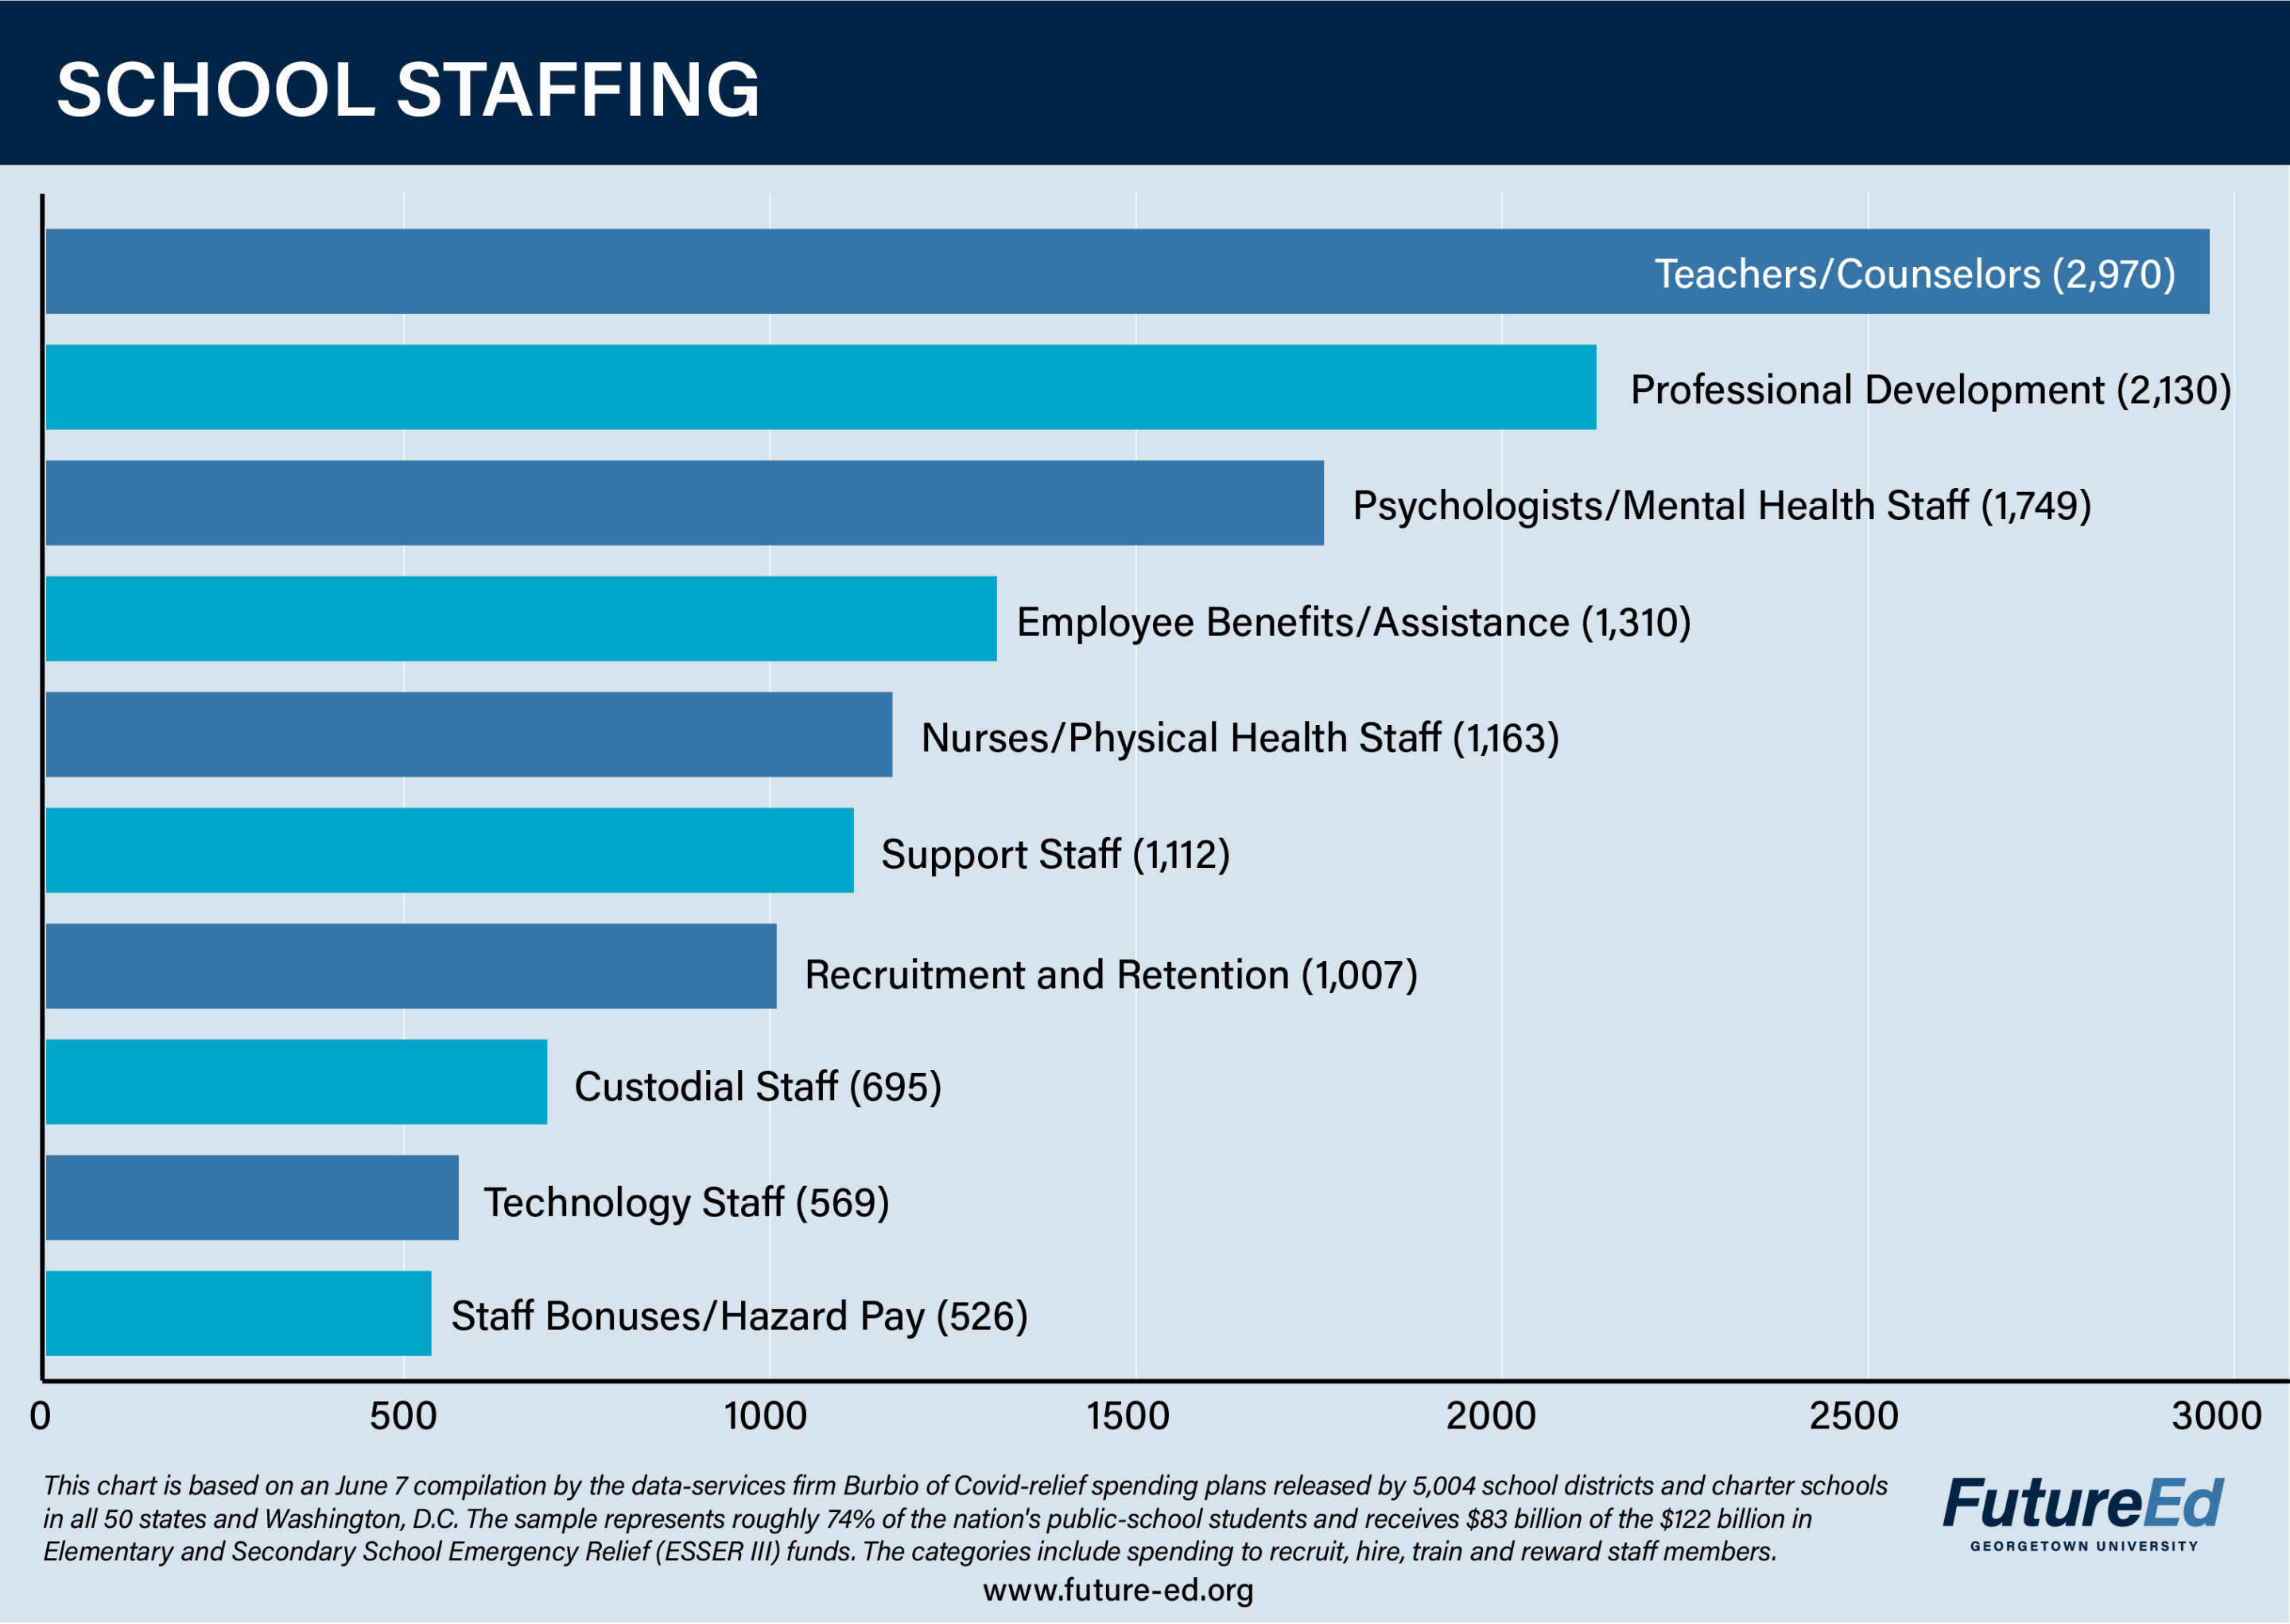 Chart: School Staffing. Teachers/Counselors: 2,970. Professional development: 2,130. Psychologists/Mental health staff: 1,749. Employee benefits/assistance: 1,310. Nurses/Physical health staff: 1,163. Support staff: 1,112. Recruitment and retention: 1,007. Custodial staff: 695. Technology staff: 569. Staff bonuses/hazard pay: 526. (This chart is based on a June 7 compilation by the data-services firm Burbio of Covid-relief spending plans released by 5,004 school districts and charter schools in all 50 states and Washington, D.C. The sample represents roughly 74% of the nation's public-school students and receives $83 billion of the $122 billion in Elementary and Secondary School Emergency Relief (ESSER III) funds. The categories include spending to recruit, hire, train and reward staff members.)